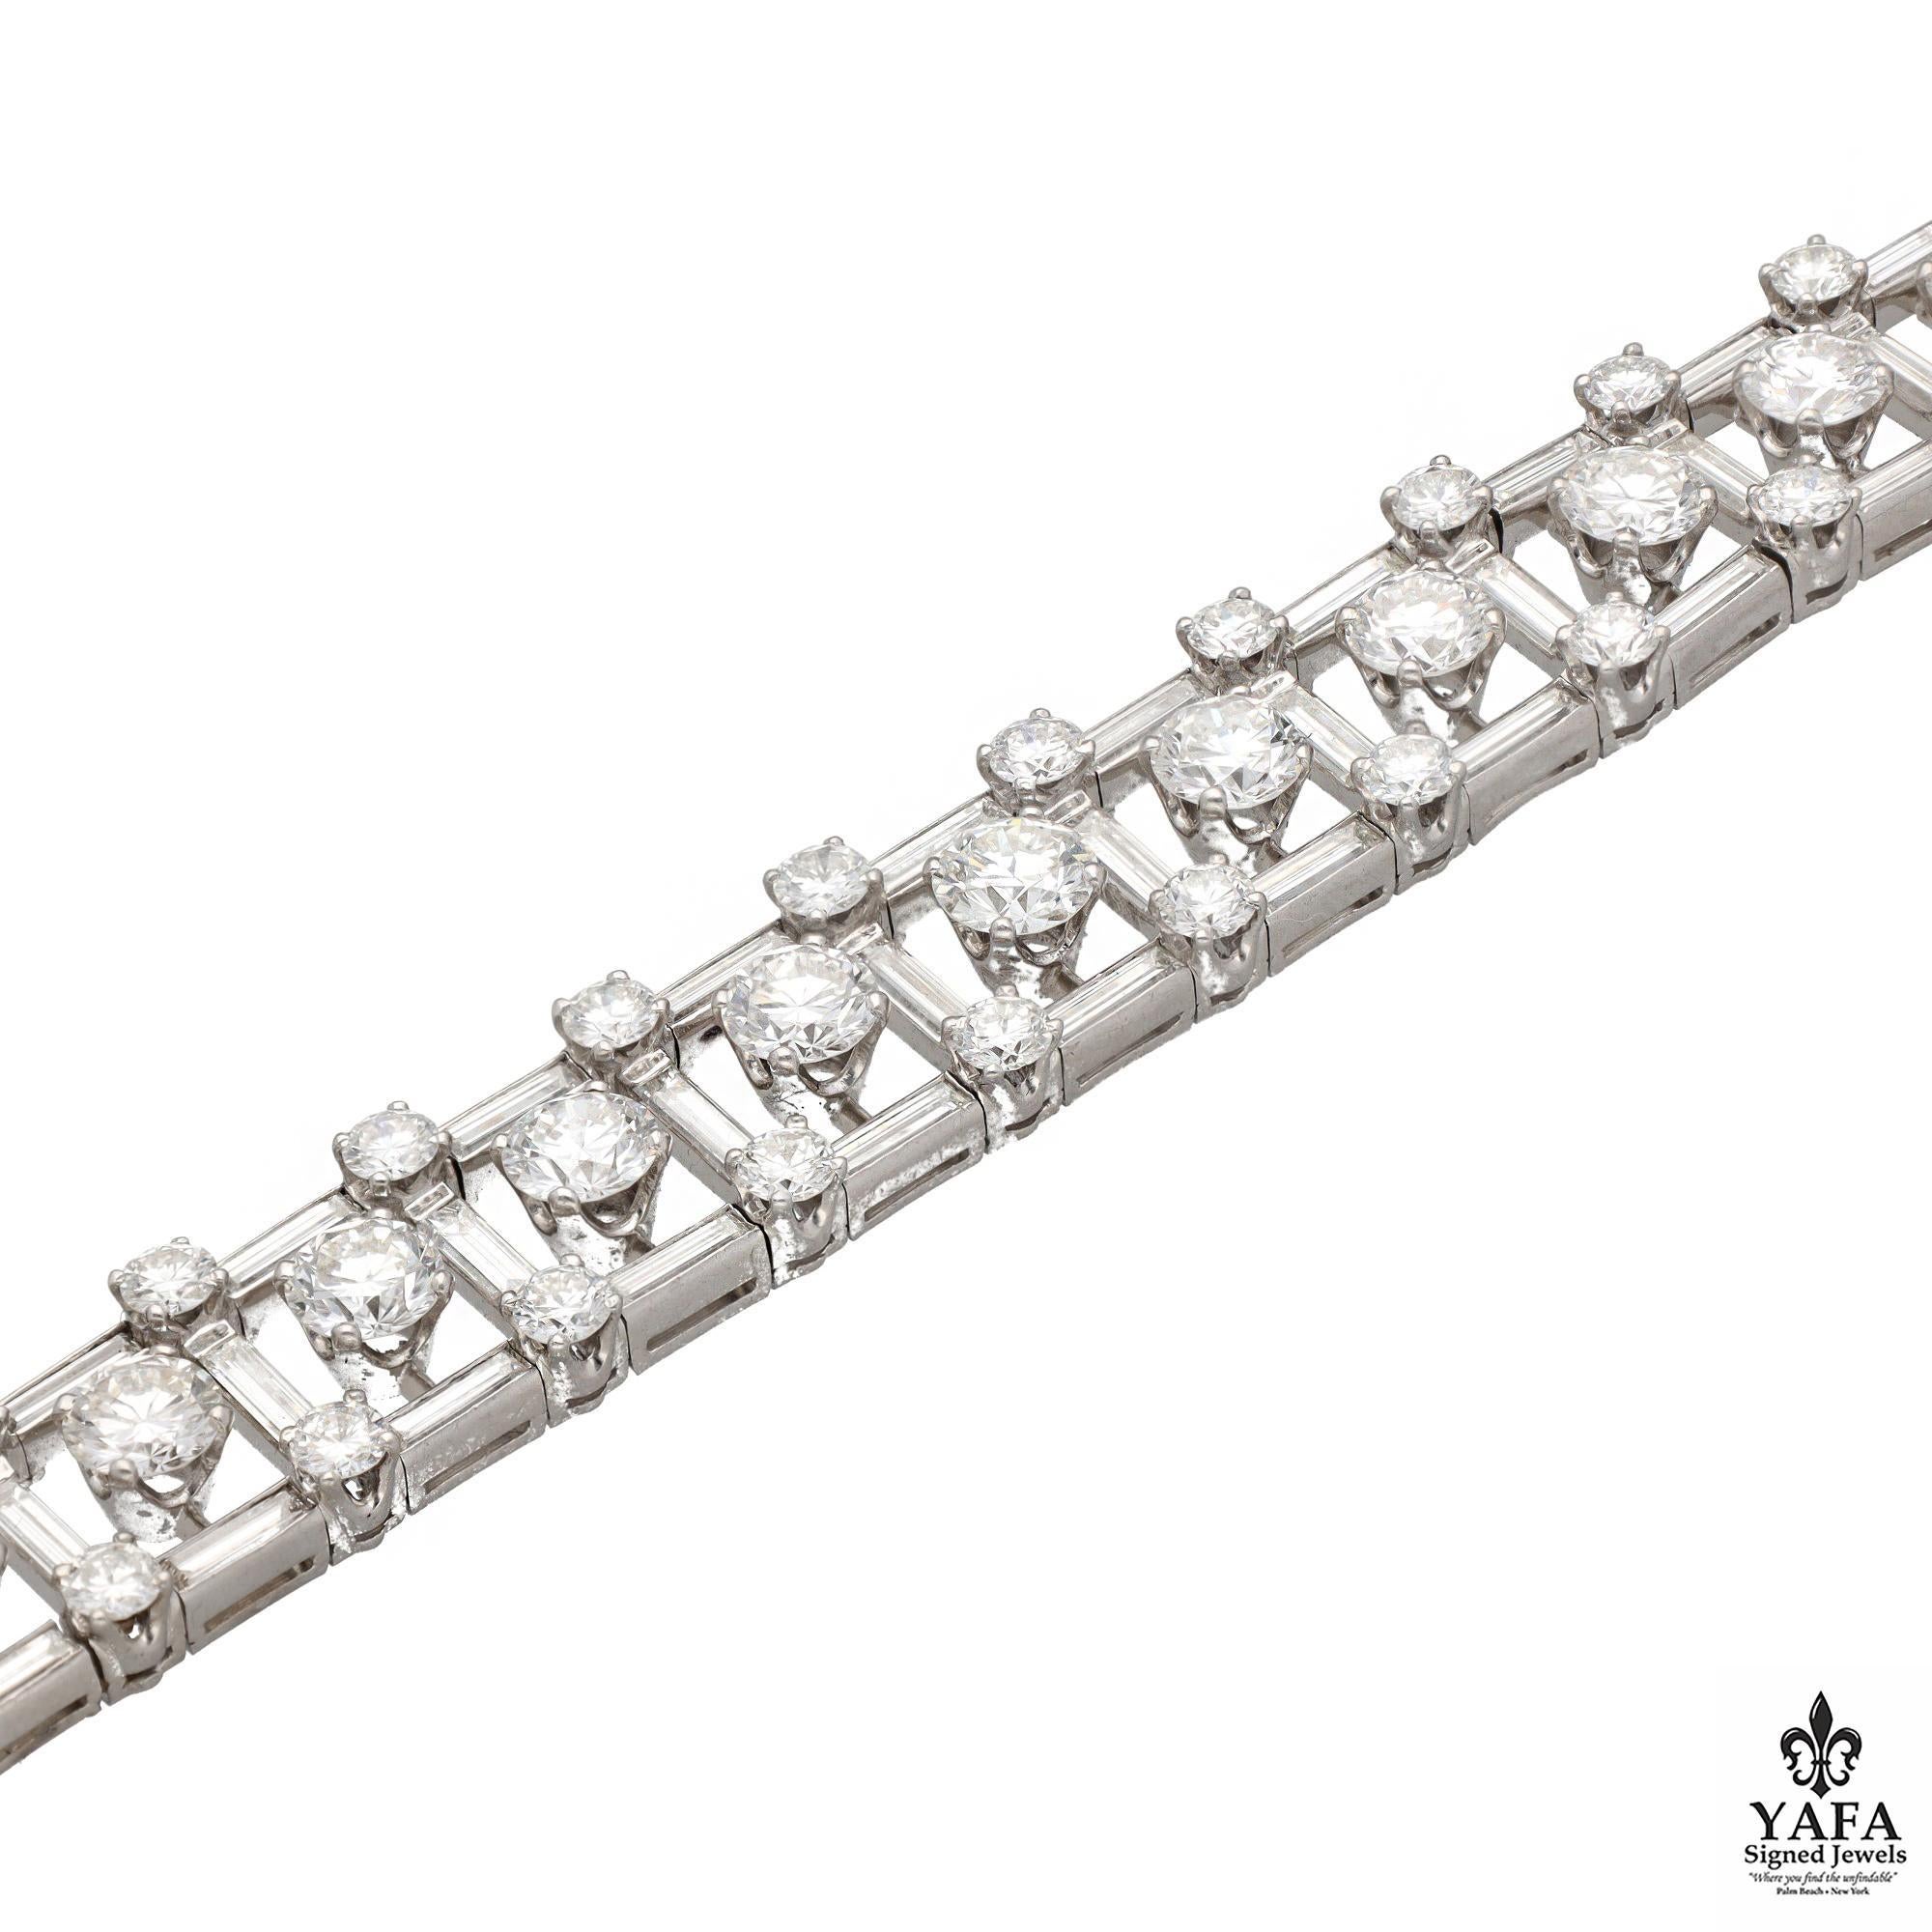 Van Cleef & Arpels Round Brilliant and Baguette Cut Bracelet Set in Platinum.
Stunningly Crafted - This Articulate Design Showcases Round Diamonds That Appear to Float Through the Center- Suspended Only by Their Shear Brilliance. This